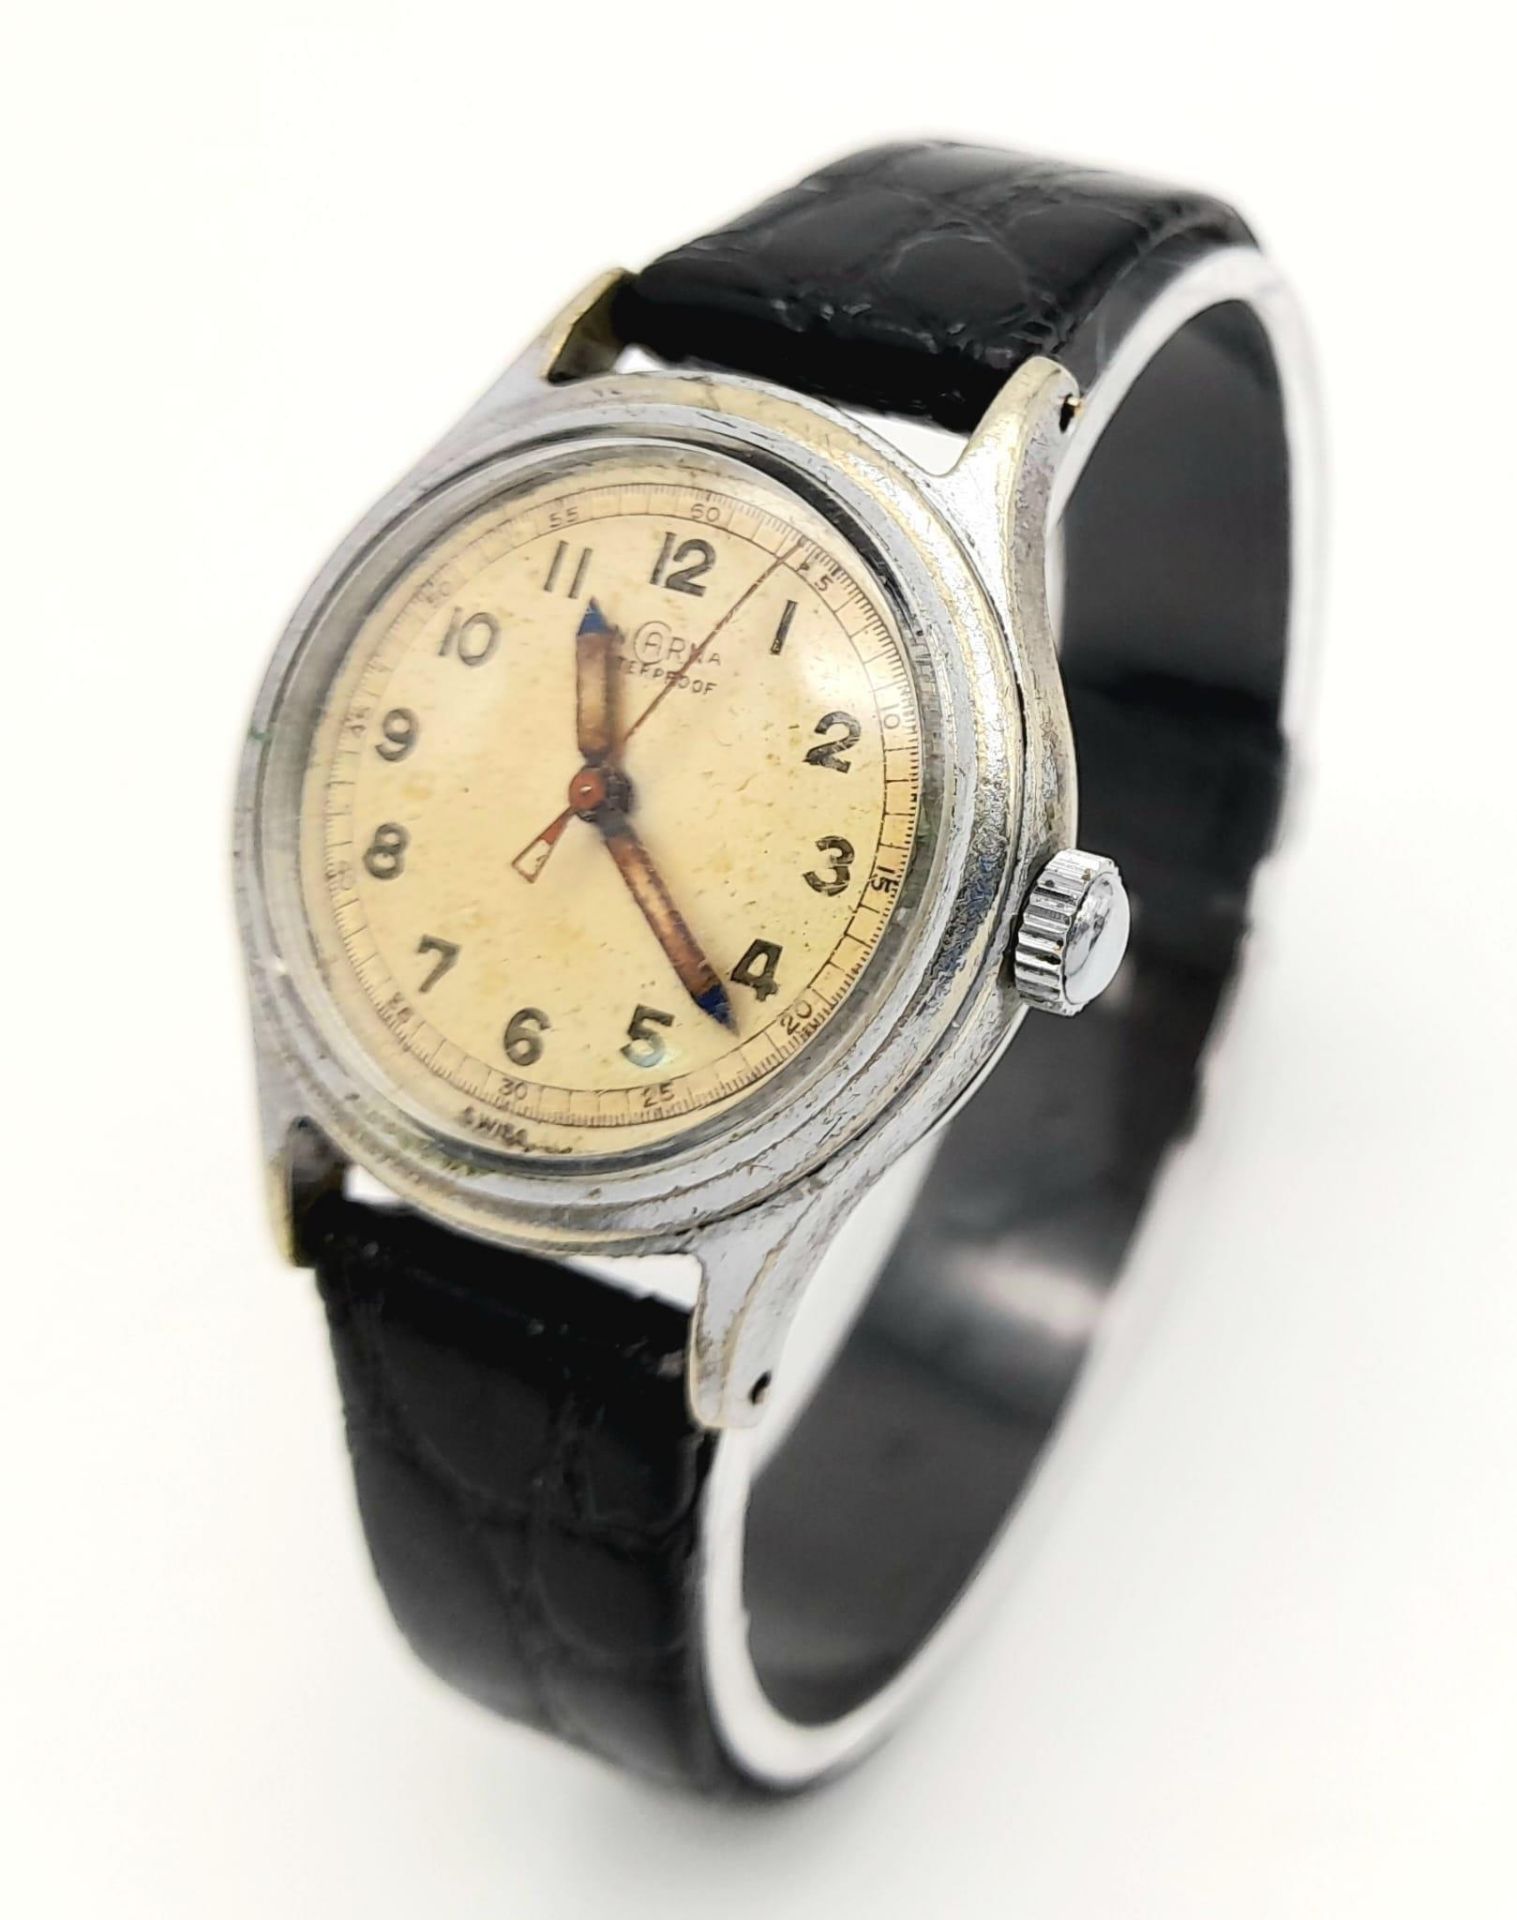 A Vintage Incarna Mechanical Gents Watch. Black leather strap. Stainless steel case - 30mm. Aged